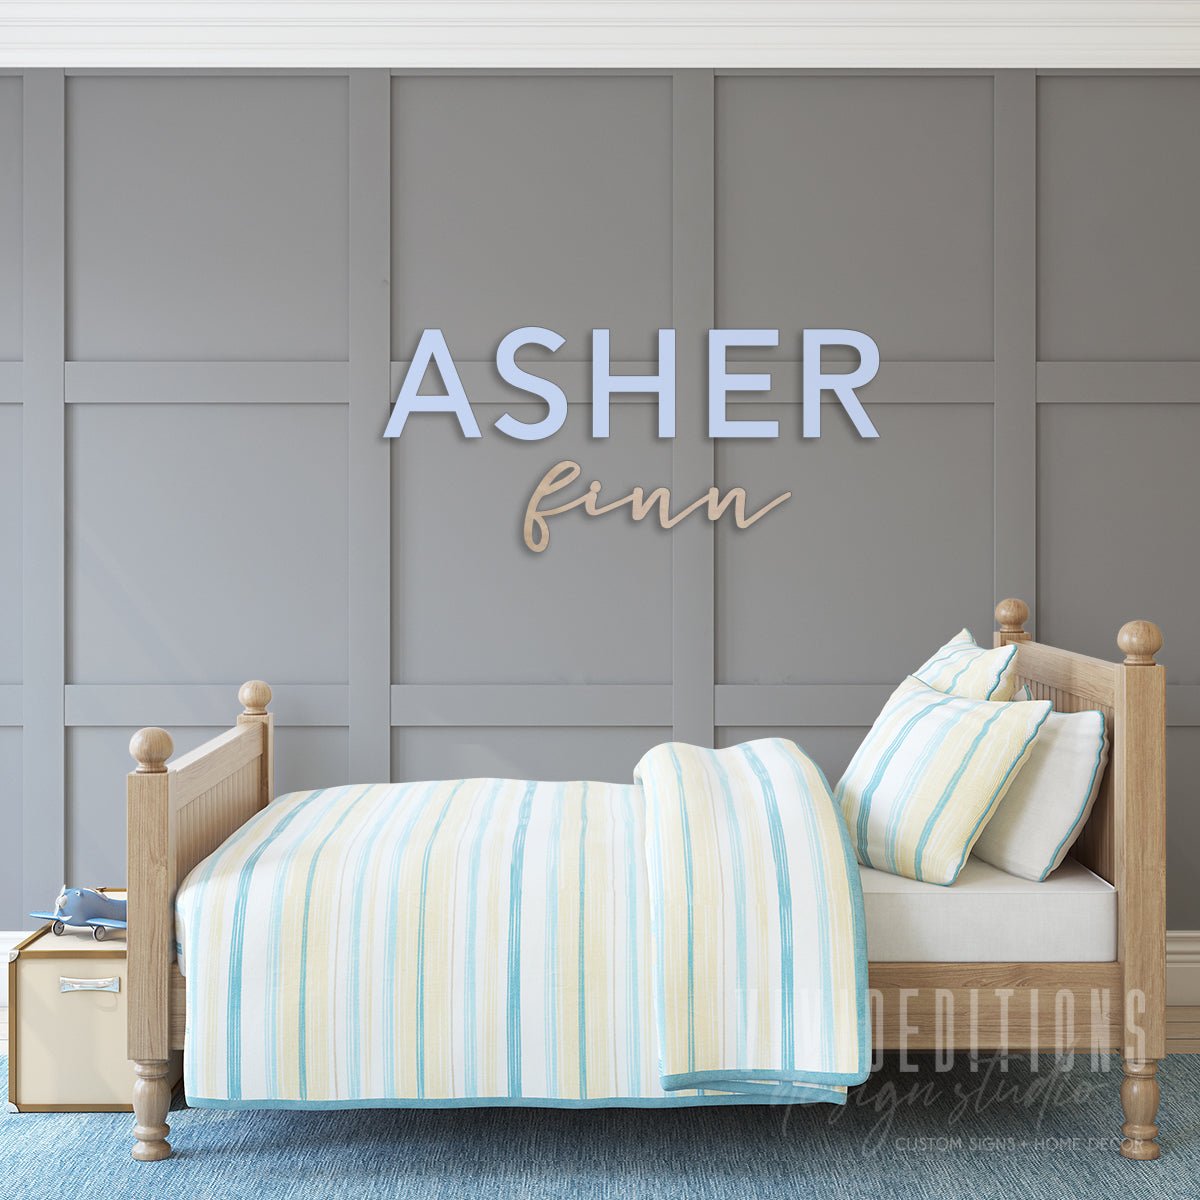 First & Middle Nursery Name Sign, Acrylic or Wood - 2pc Set - VividEditions